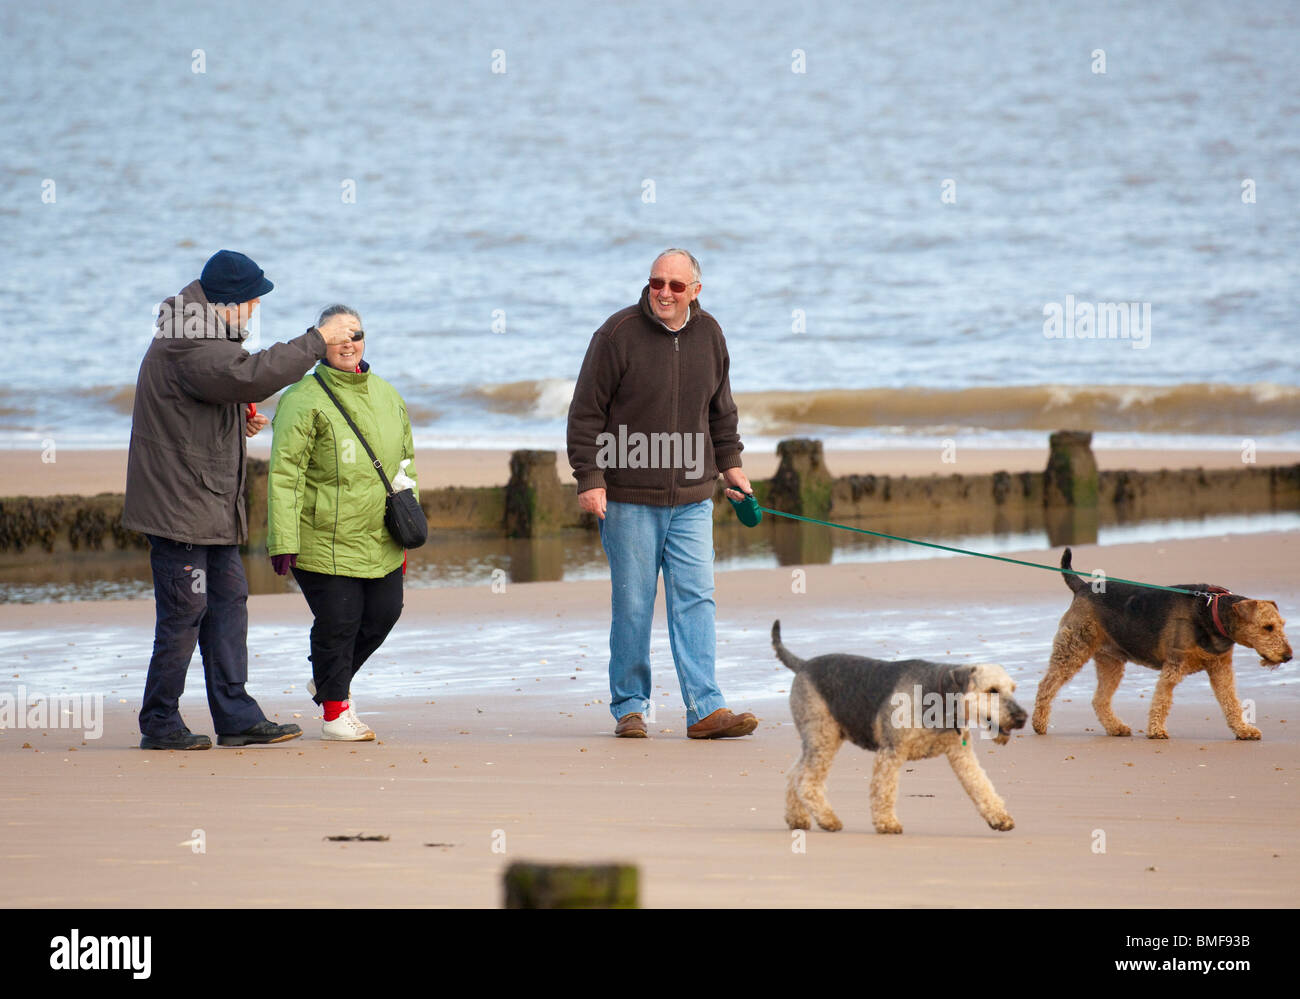 group of people walking with dogs on beach Stock Photo